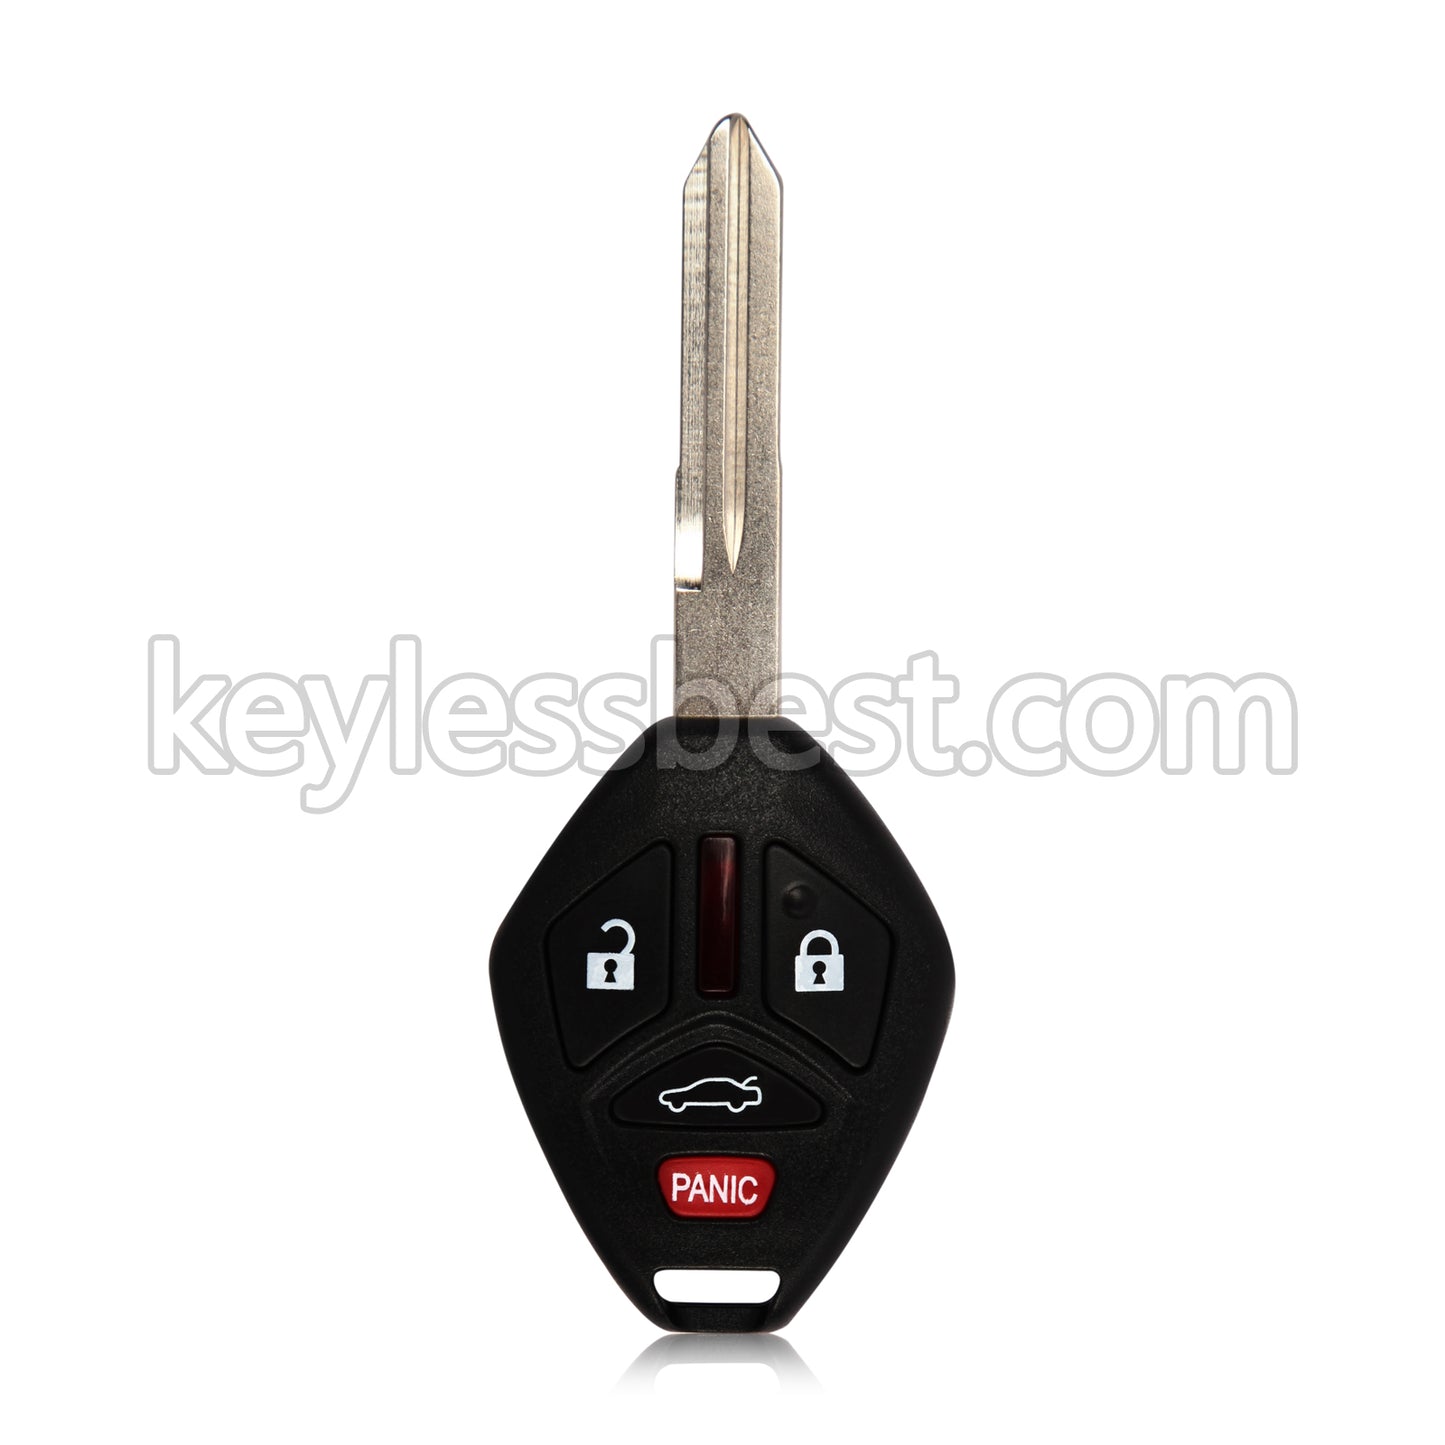 2006 - 2007 Mitsubishi Eclipse Galant / 4 Buttons Remote Key / OUCG8D-620M-A / 315MHz